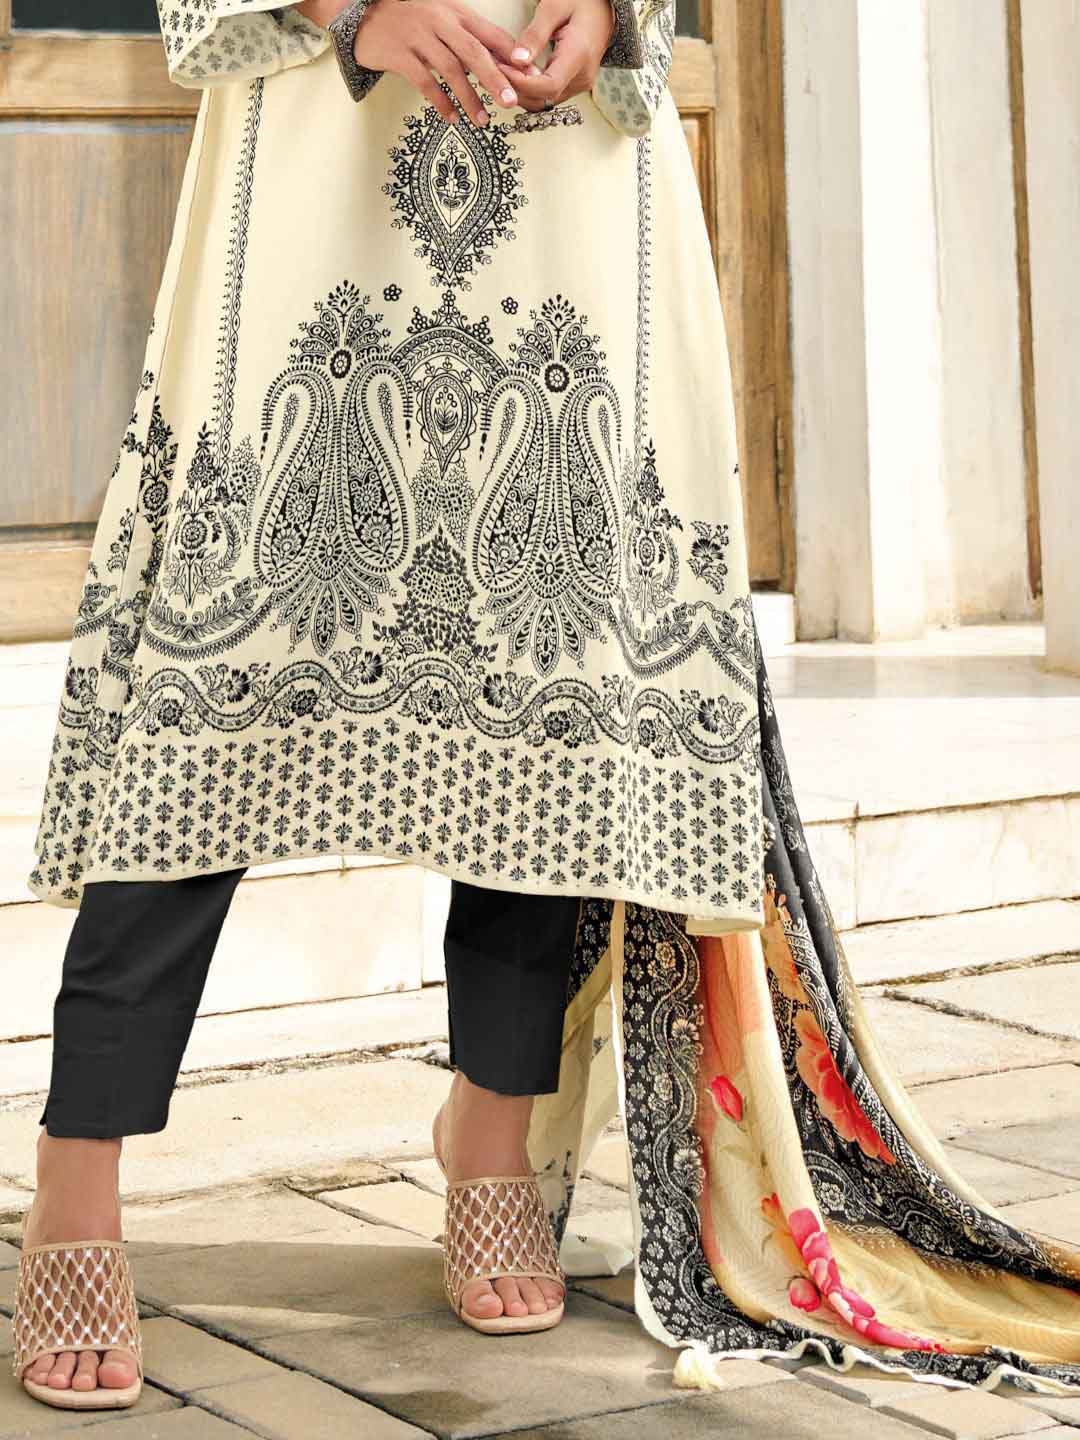 Woolen Unstitched Cream Winter Suit Dress Material with Zari Work Rang Fashion